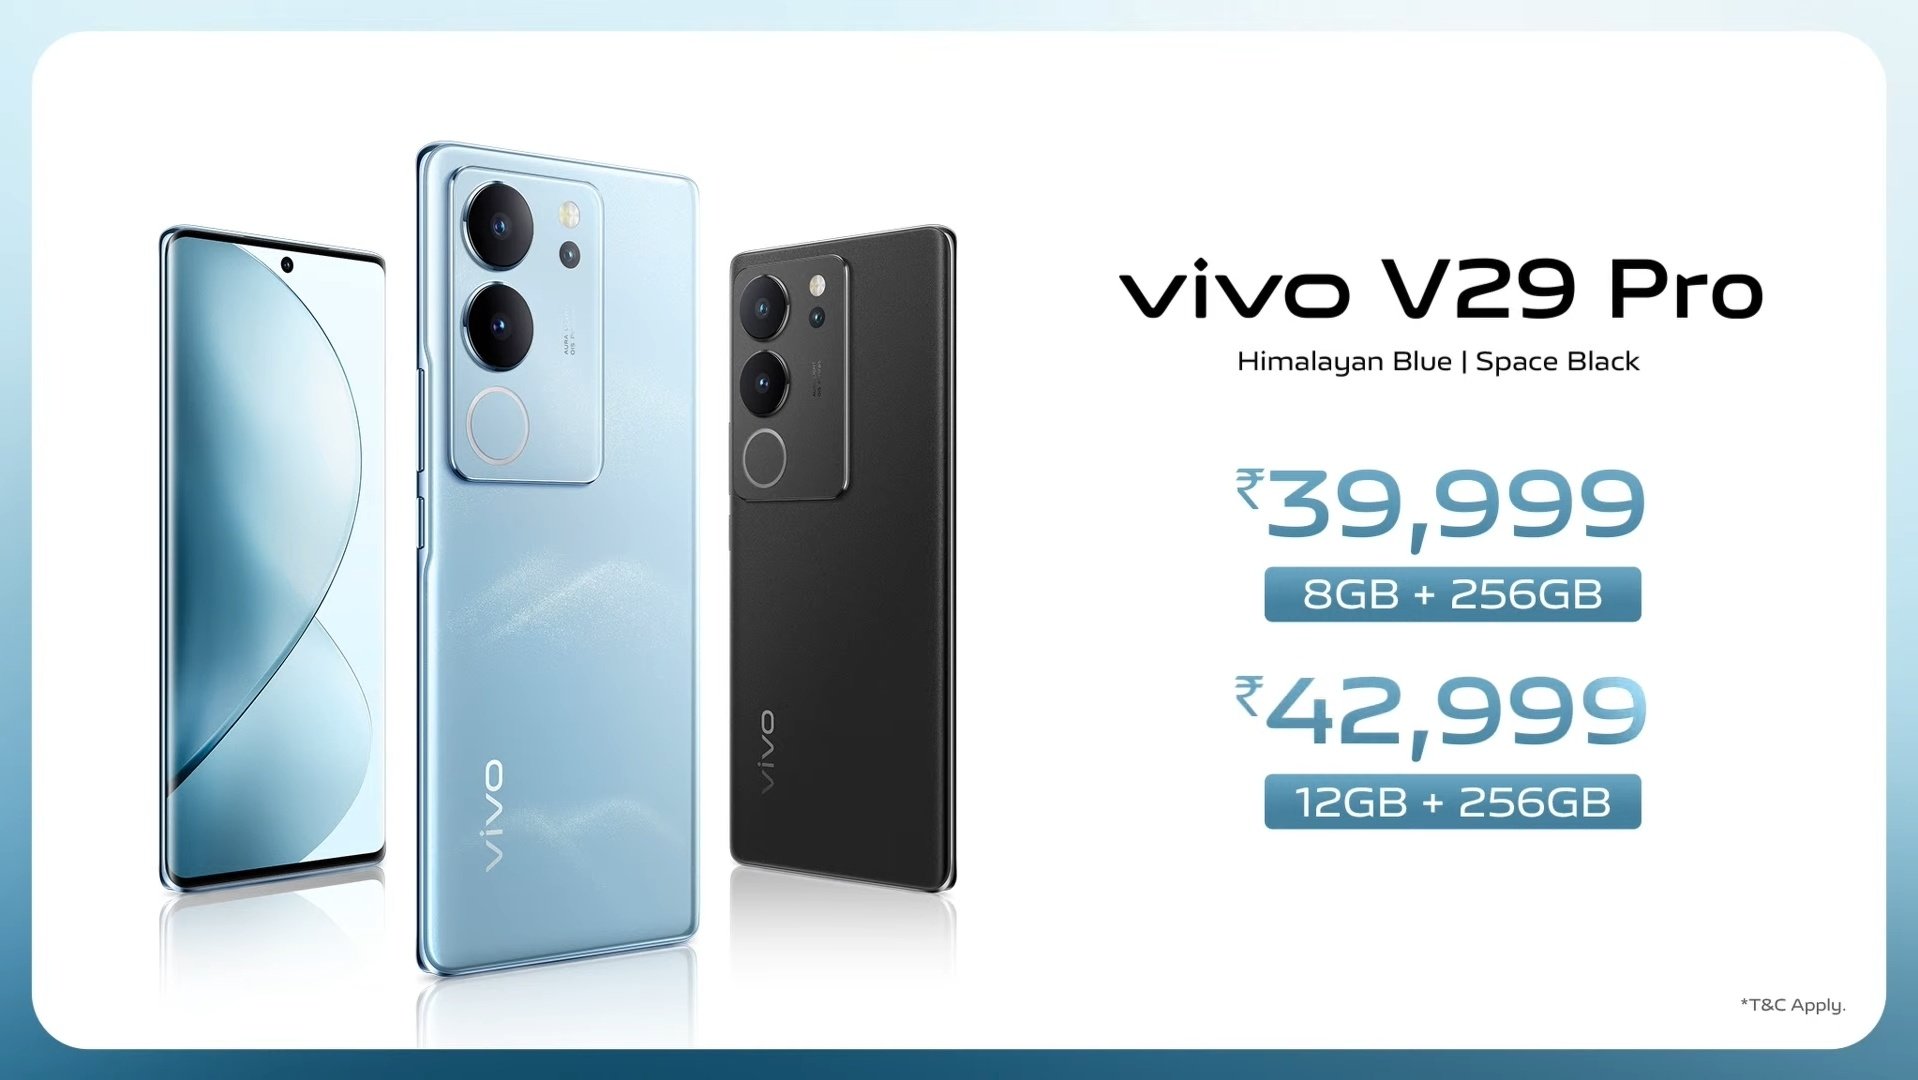 Vivo V29, Vivo V29 Pro launched in India; check price, features